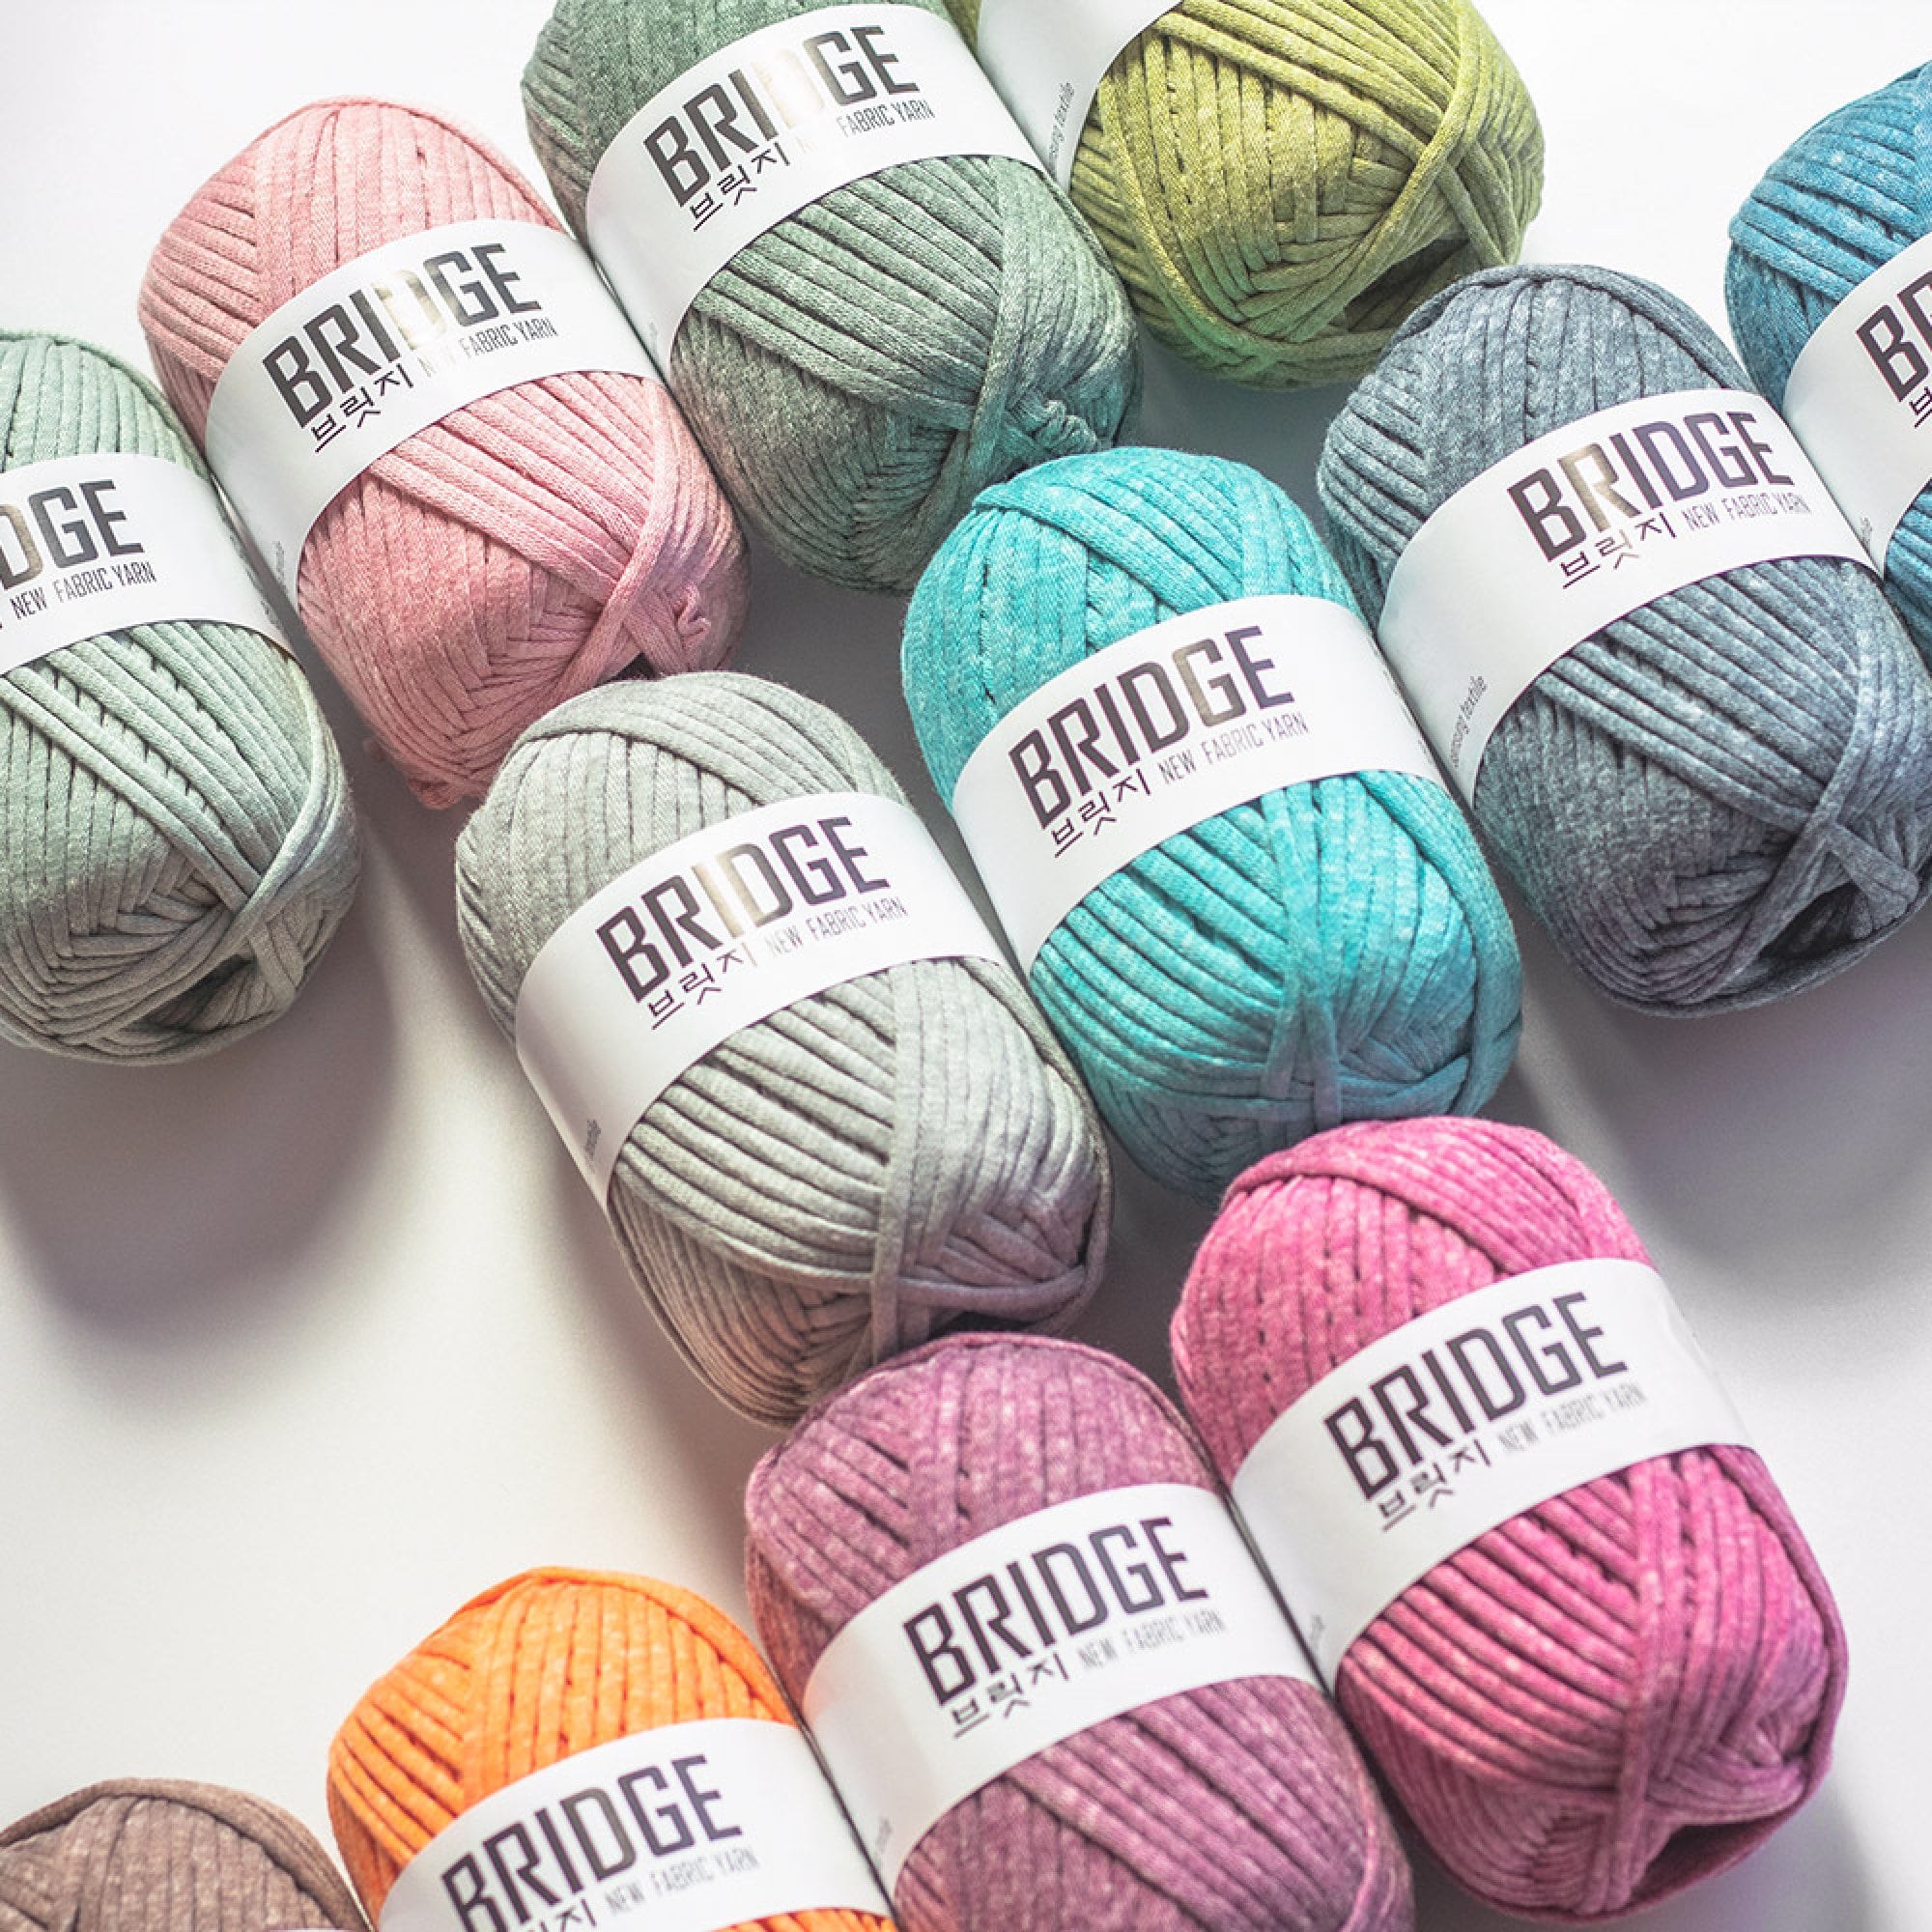 Muse Yarn: Crochet, Knitting and More. Polyester Yarn Perfect for Bags,  Hats, Rugs and Pet Cushions, High Quality, 100% Polyester, 30 Colors 